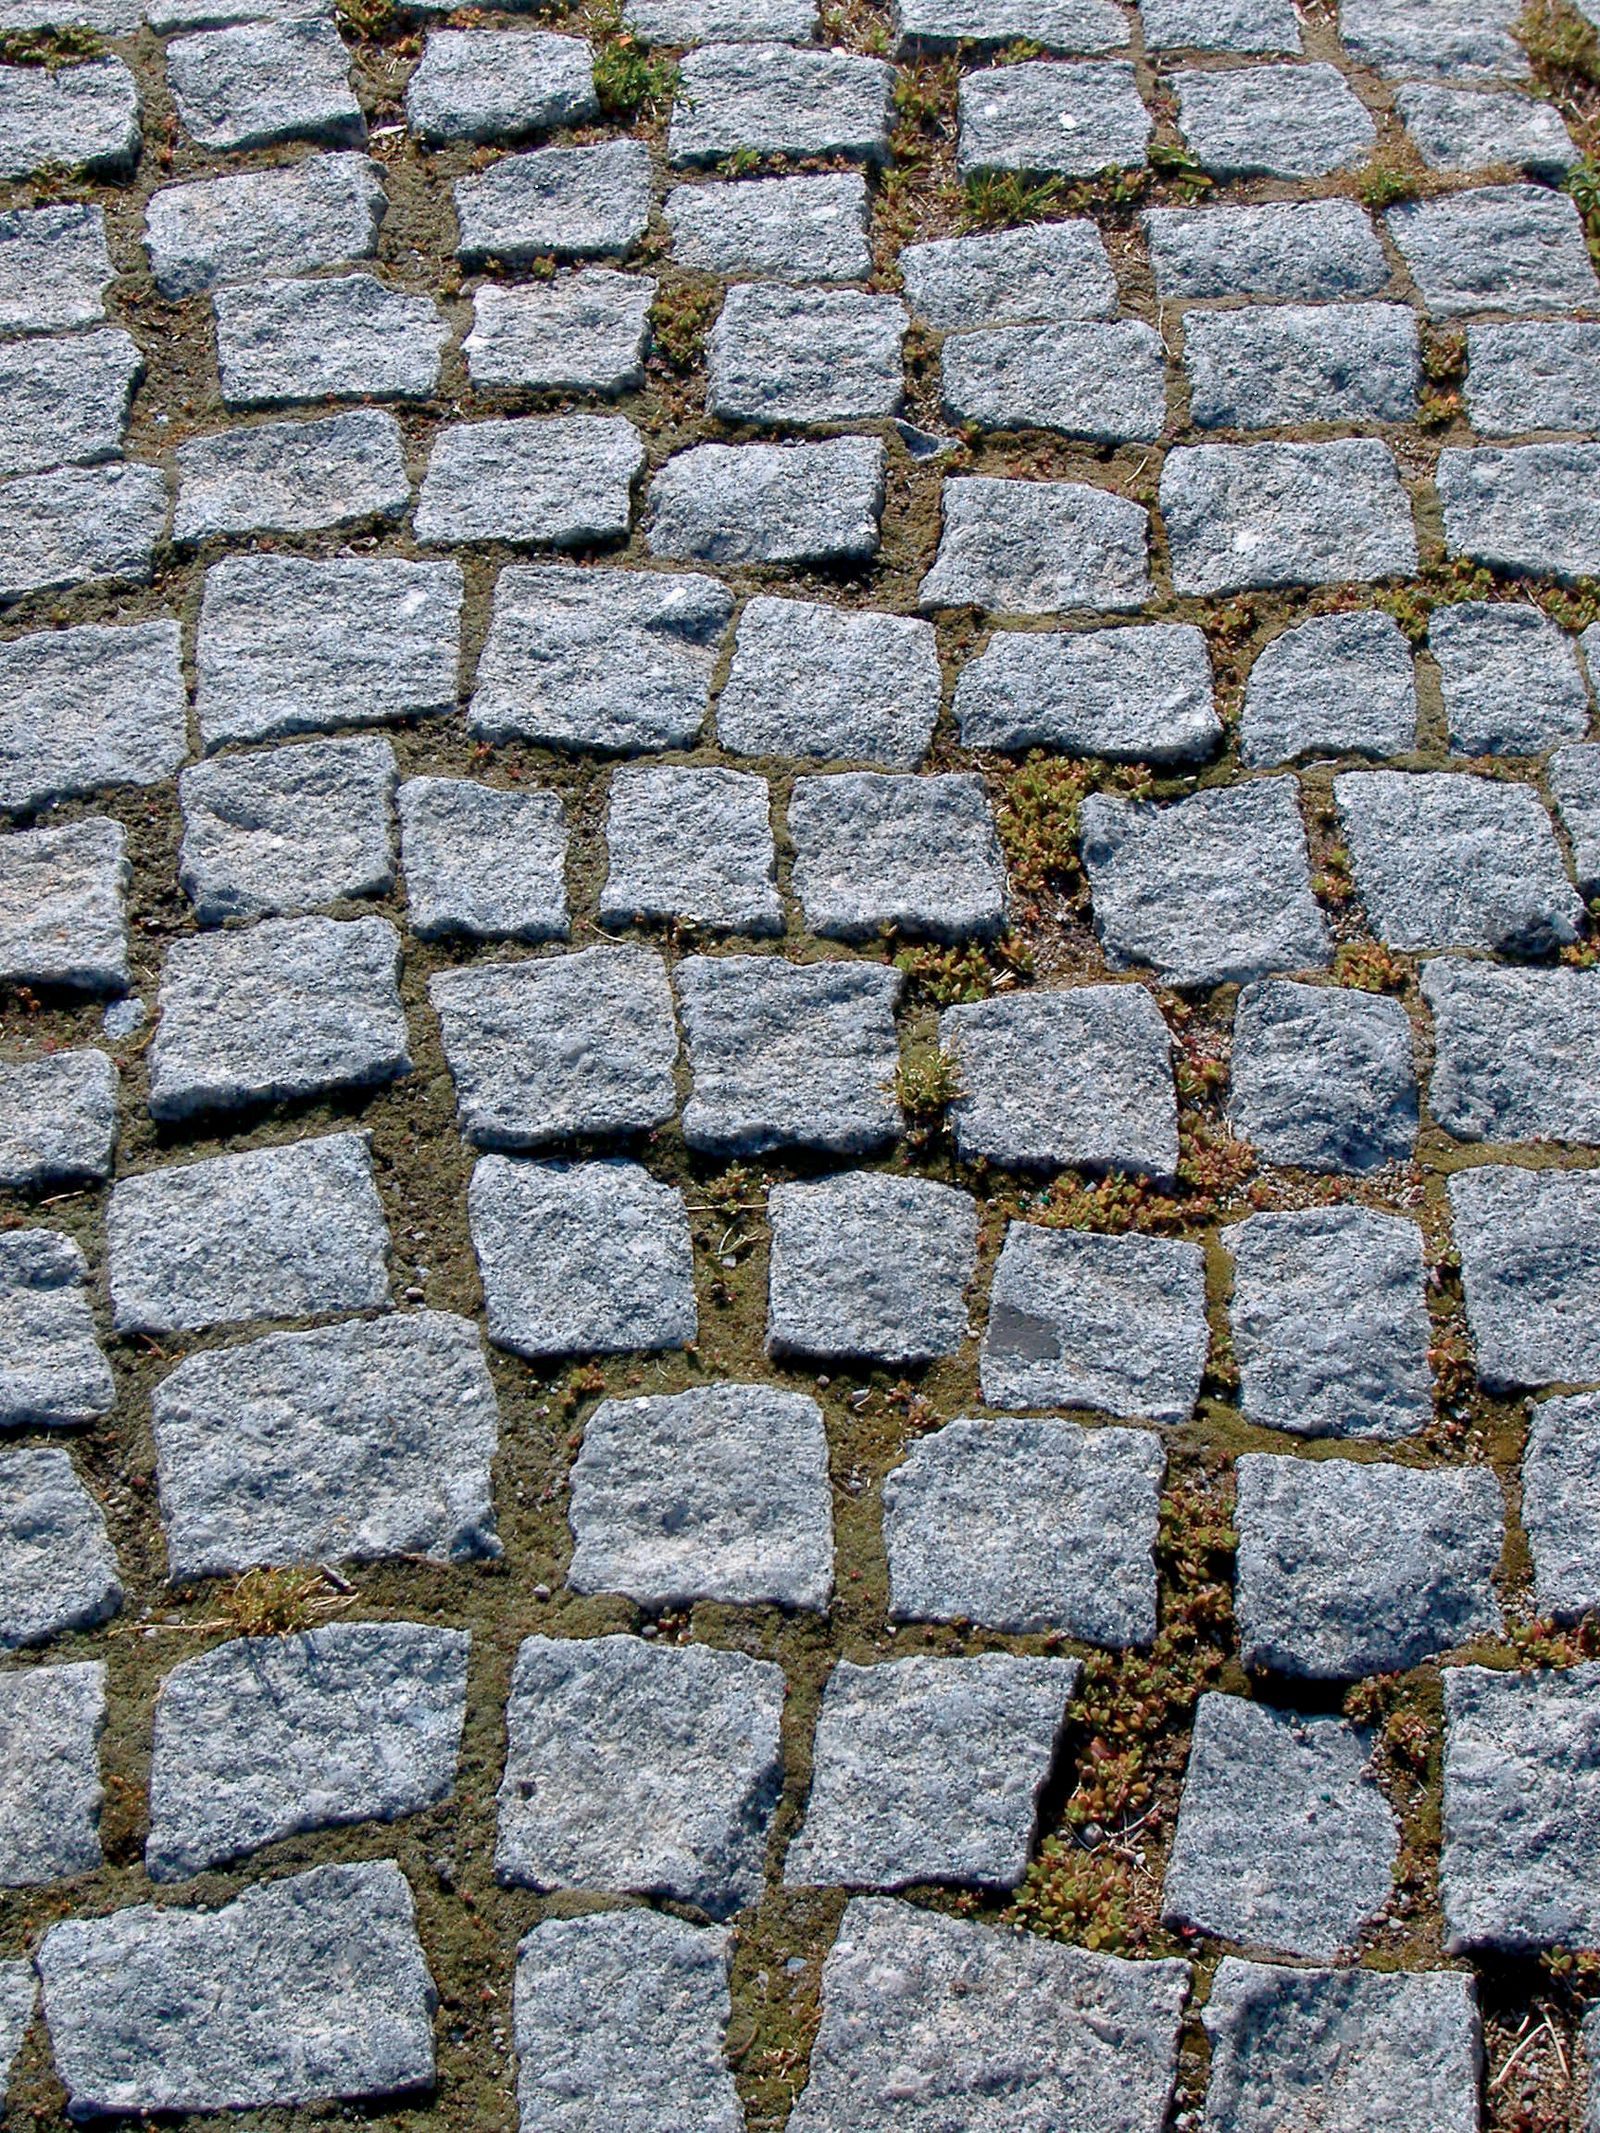 Small, square gray stones forming a straight path.